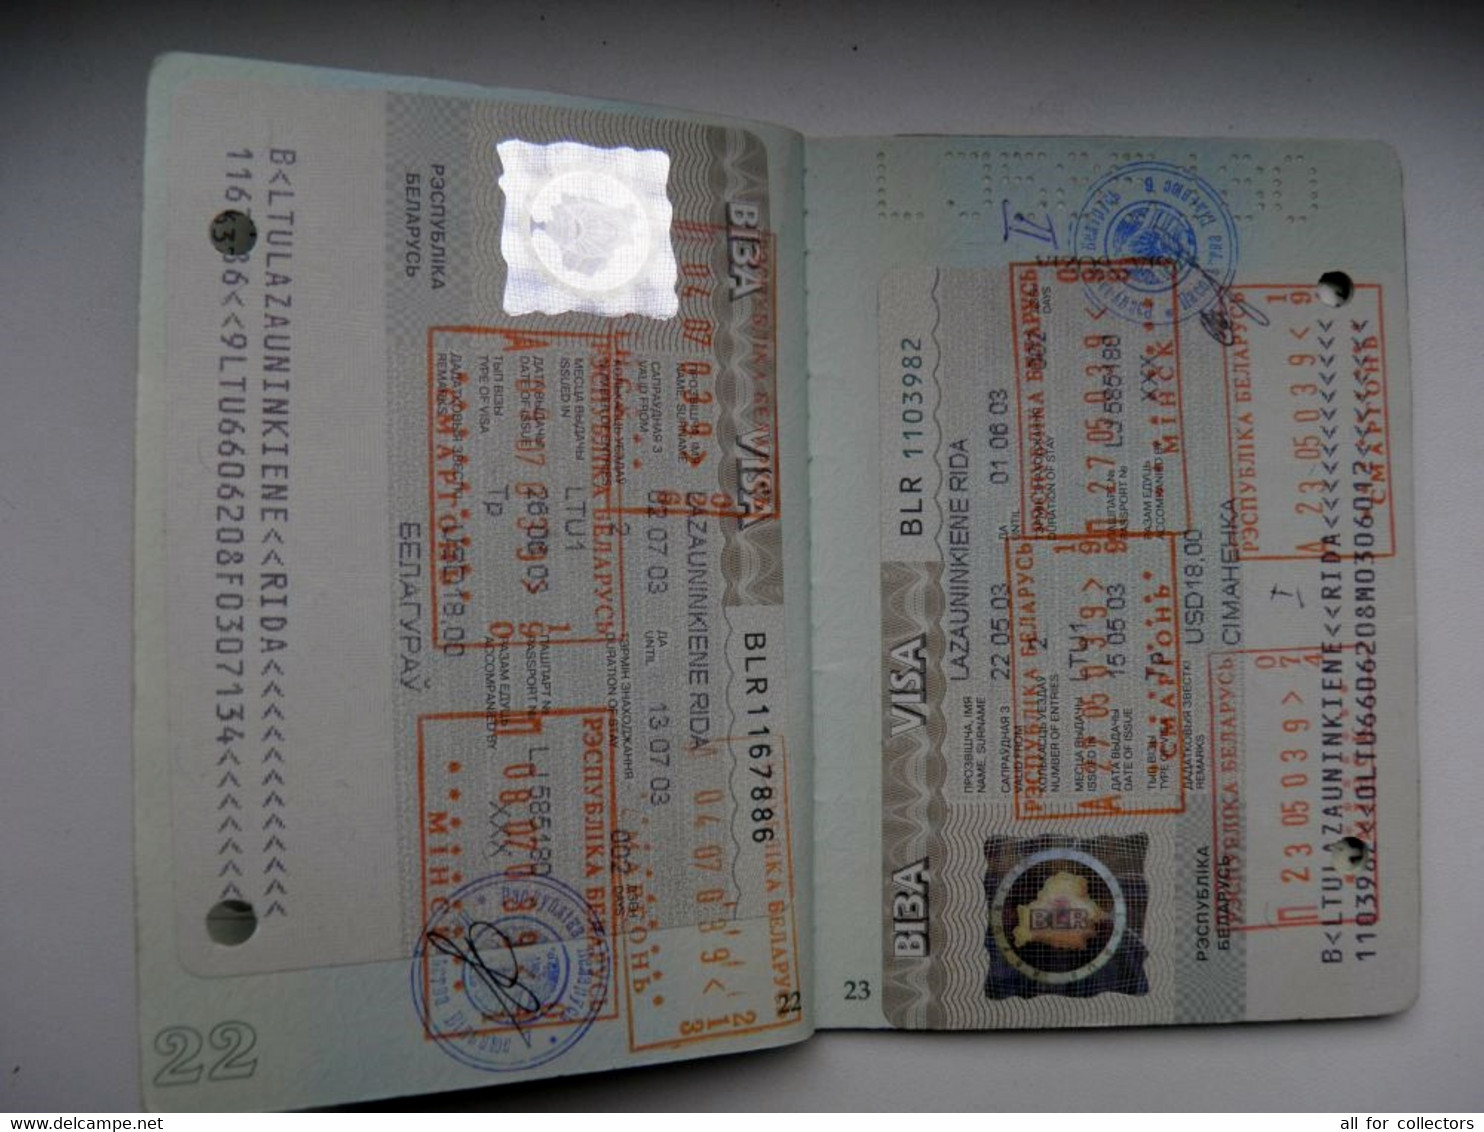 passport Lithuania expired with holes plenty VISA's and cancels Turkey (21) Belarus (11)